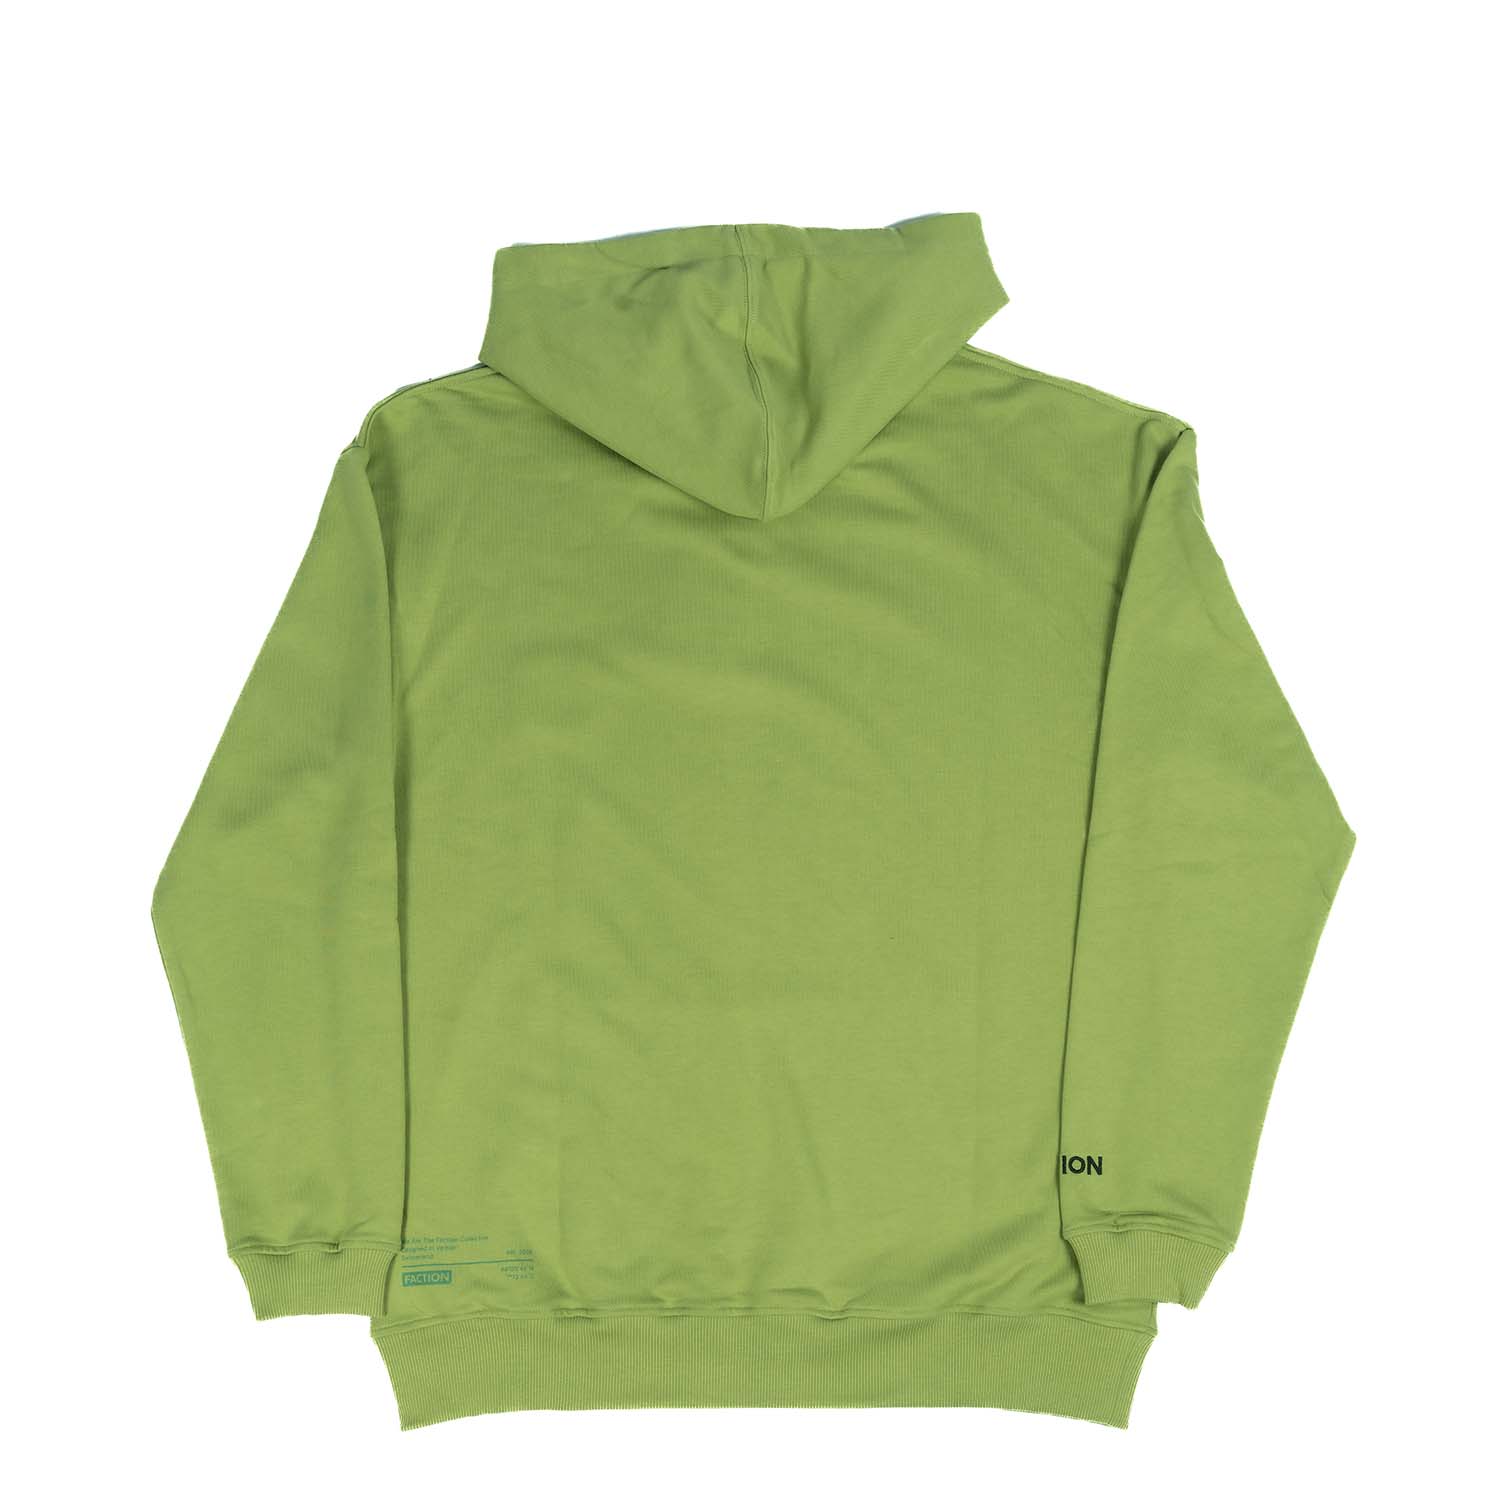 Faction Classic Hoodie Khaki Green Flat Lay Front